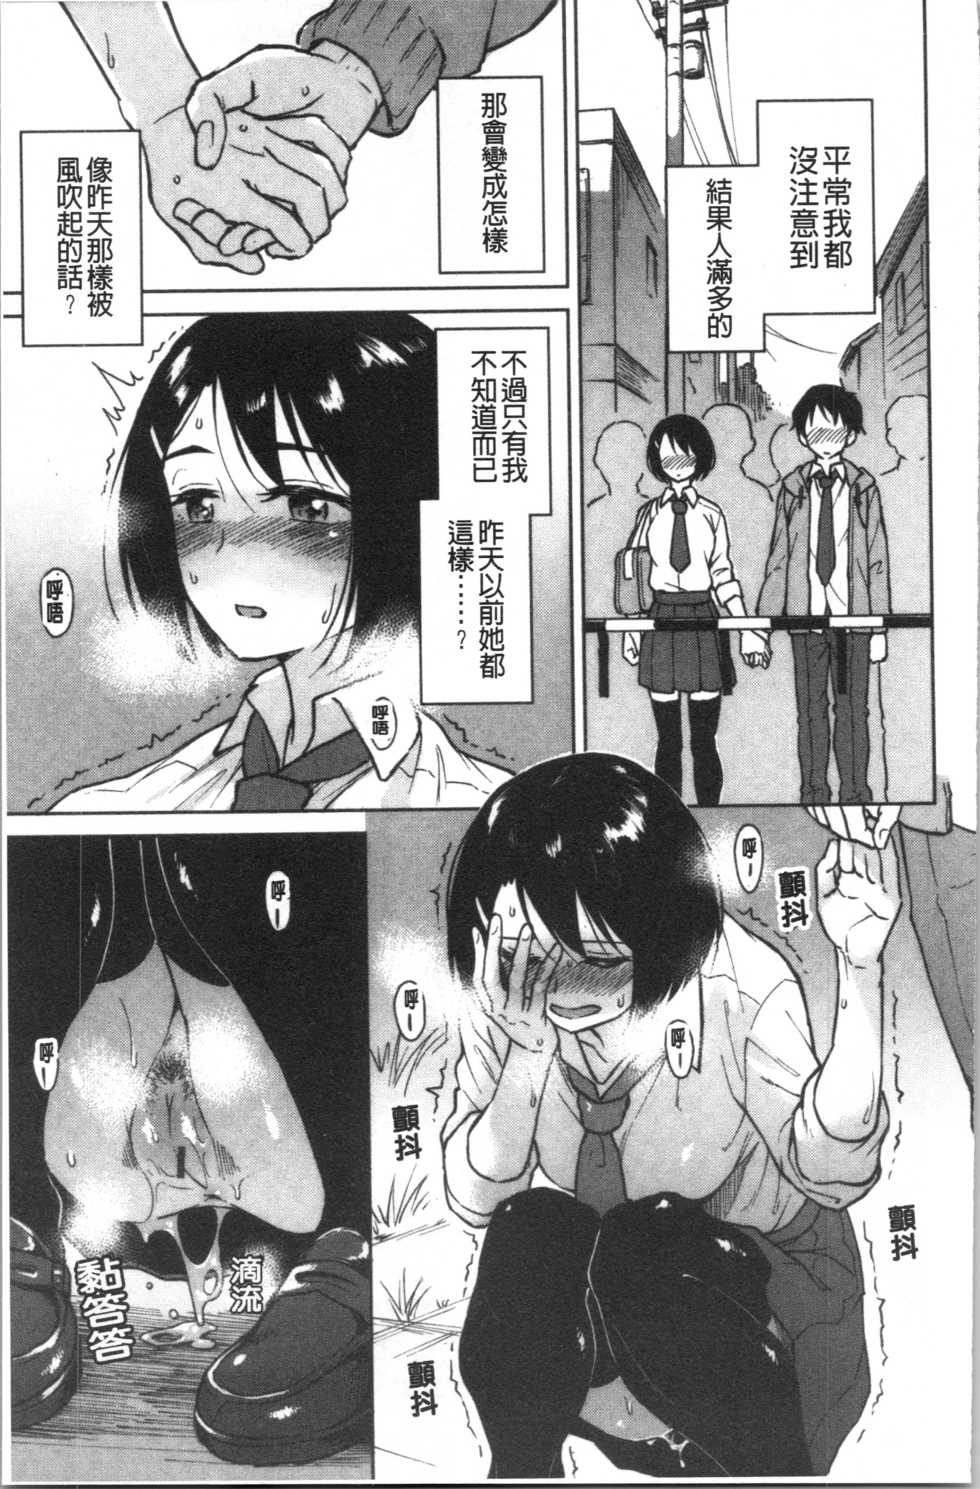 [Pennel] Houkago wa Bouken no Jikan - Time for libido after school [Chinese] - Page 33